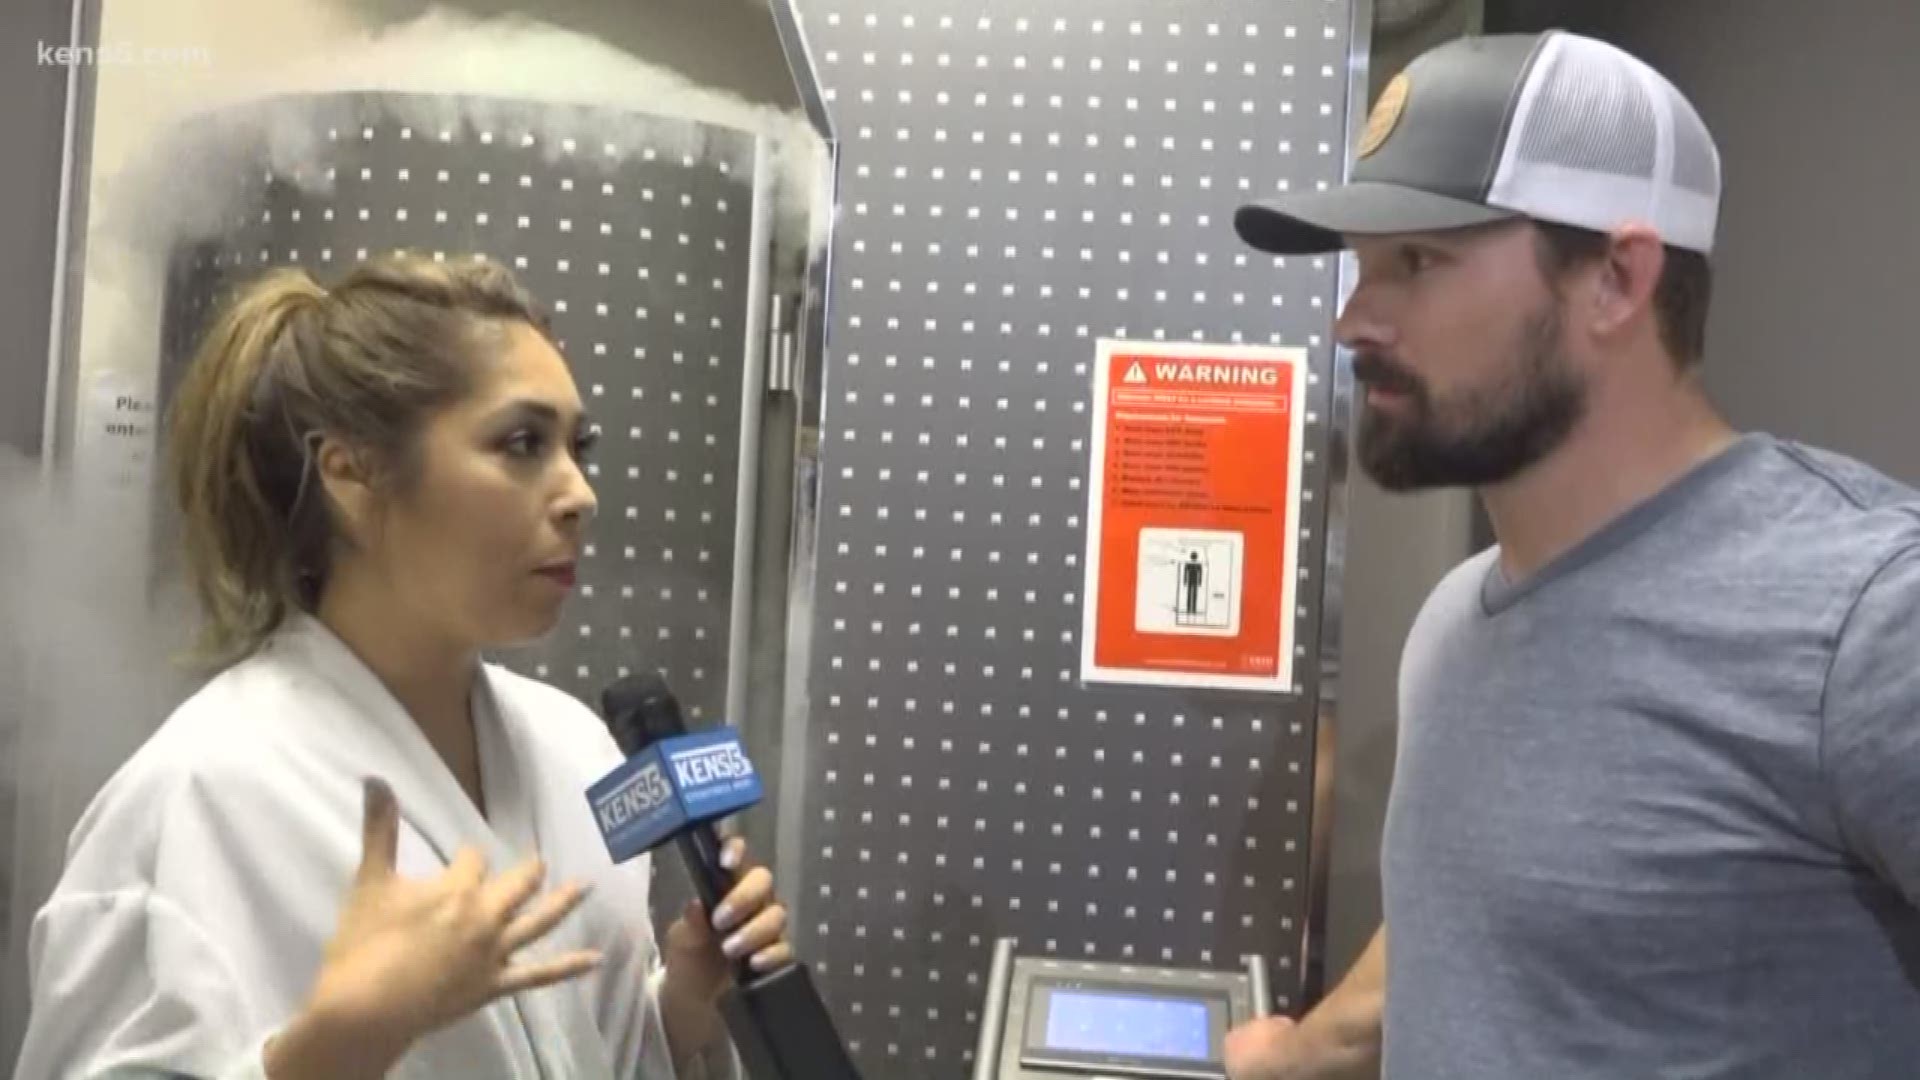 KENS 5's Audrey Castoreno explores the instant effects of Cryotherapy. The treatment shocks your body with freezing temperatures as a quick way to jump start healing and relieve stress.